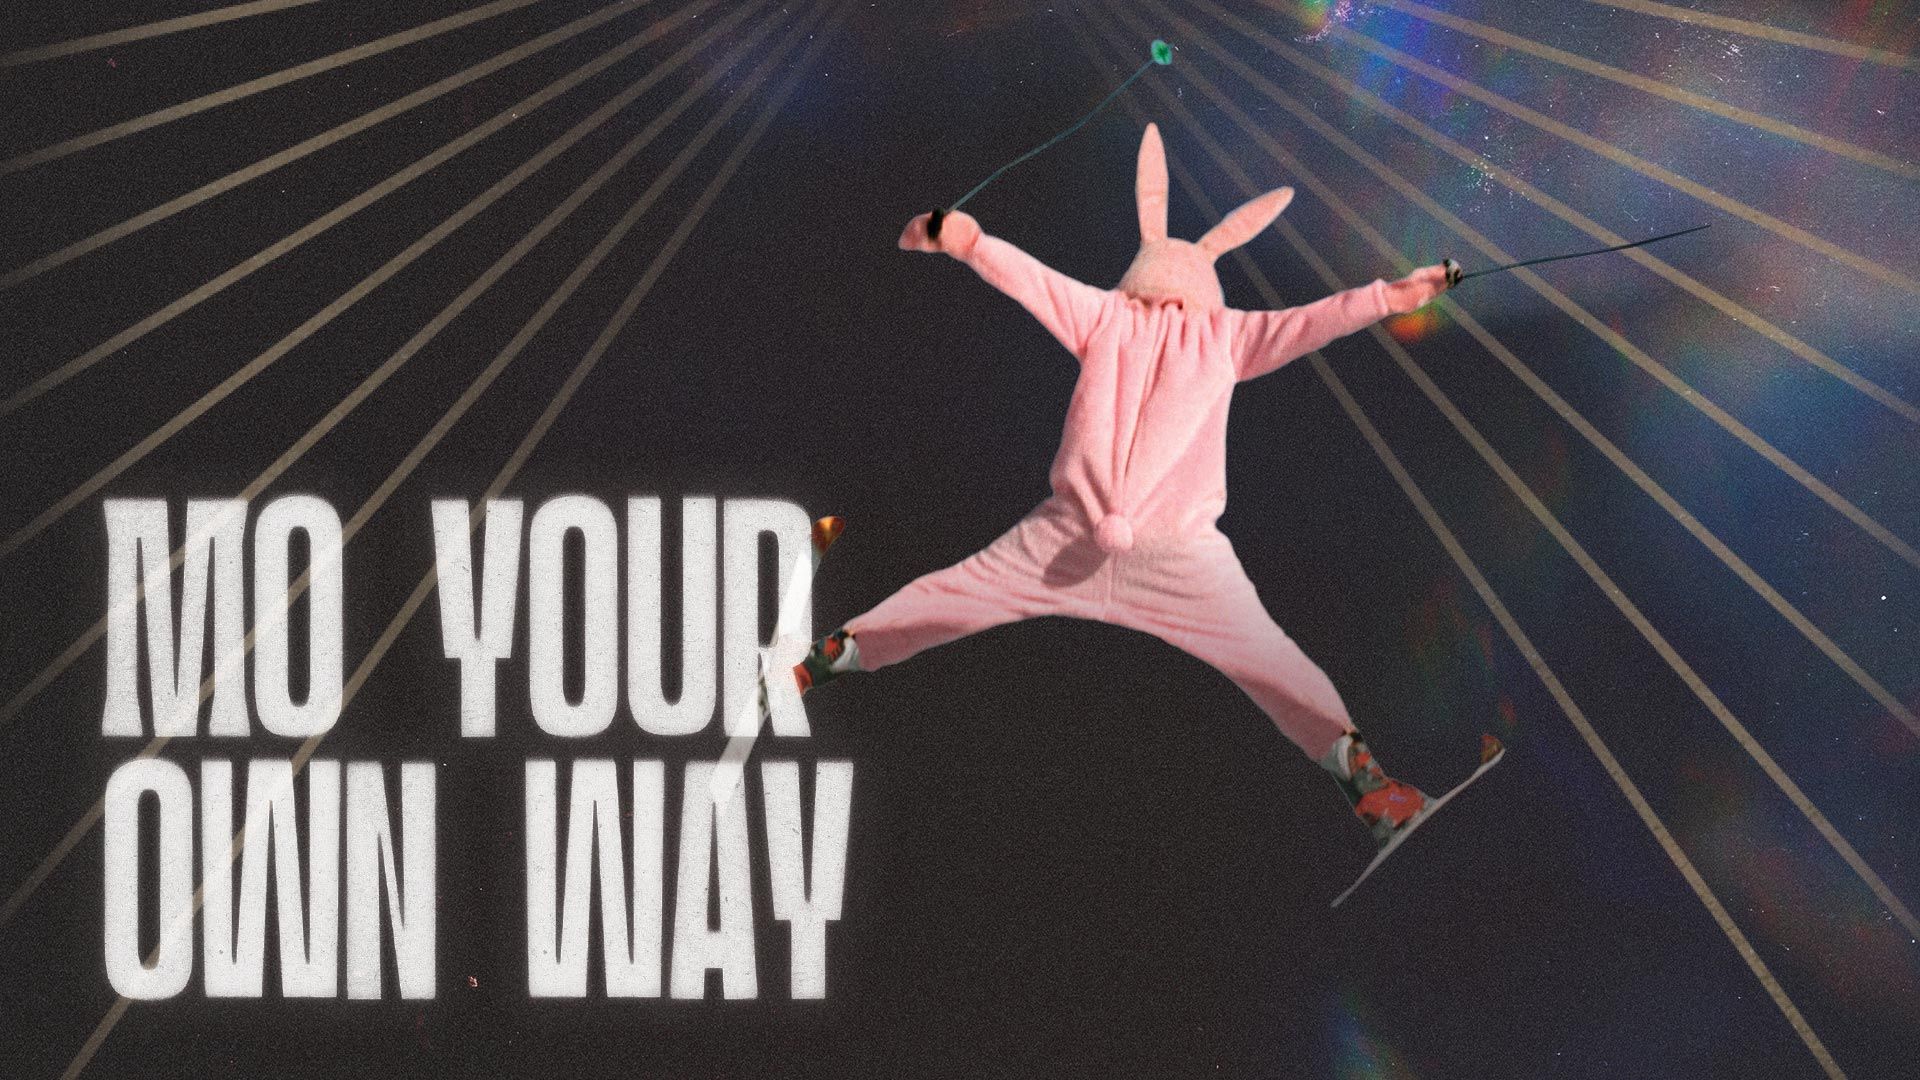 A black and white photo of a man jumping in skies while wearing a full rabbit suit. The words "MO YOUR OWN WAY" are superimposed.